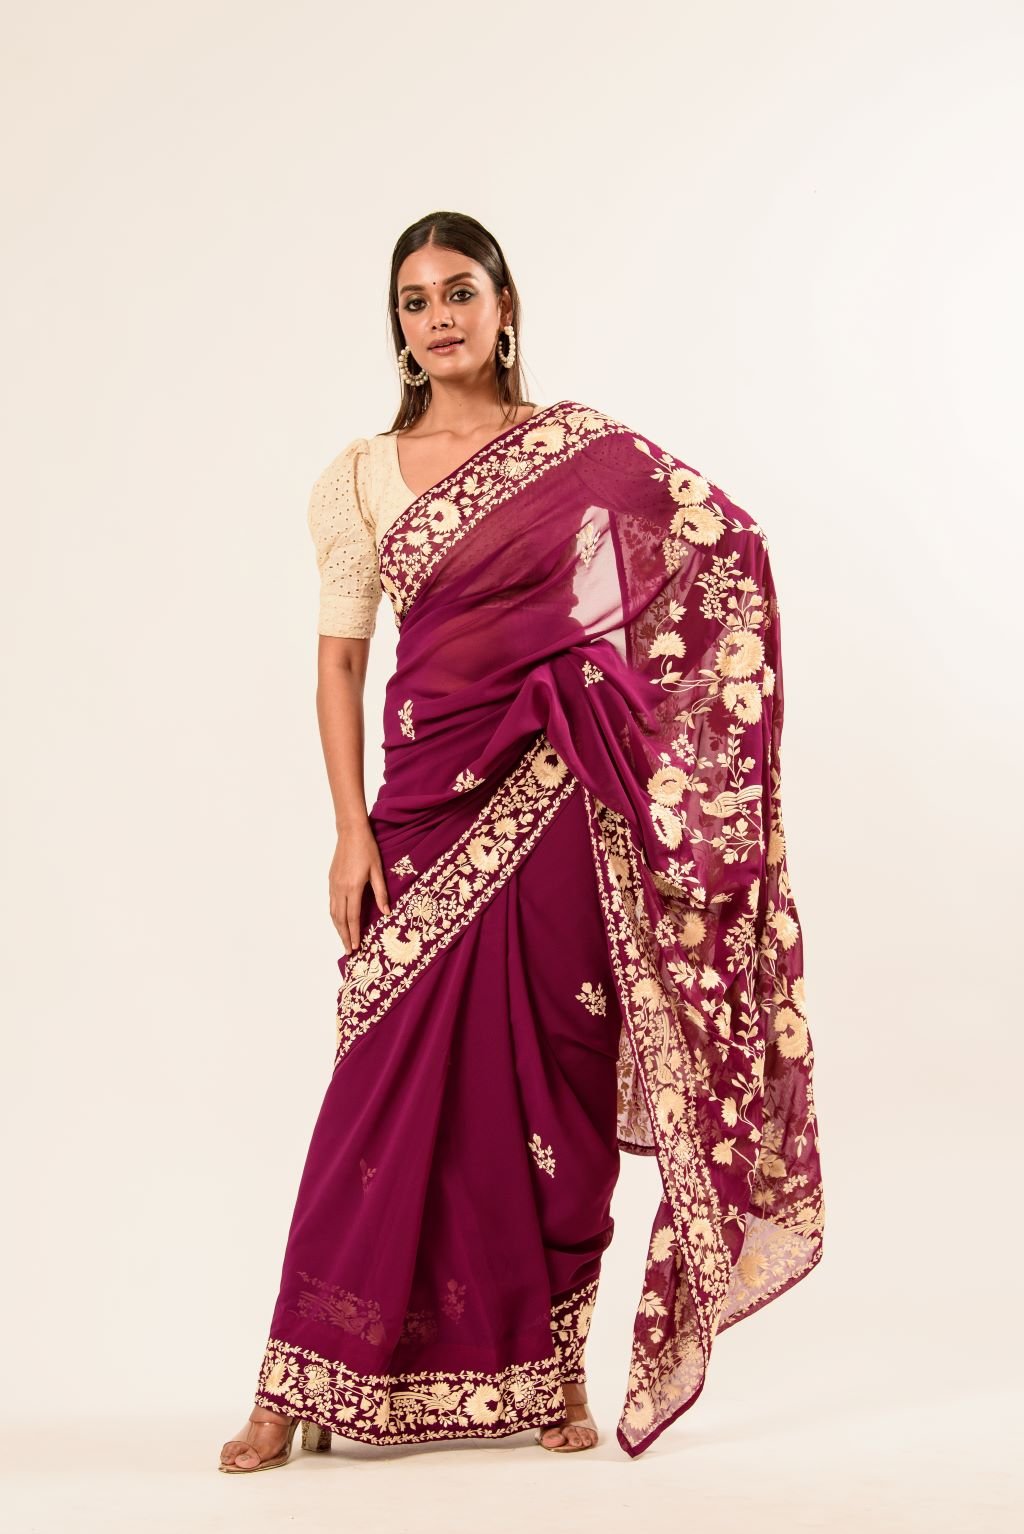 Maroon Parsi Gara Saree in Georgette with an Embellished Hand Embroidered Work - Anvi Couture